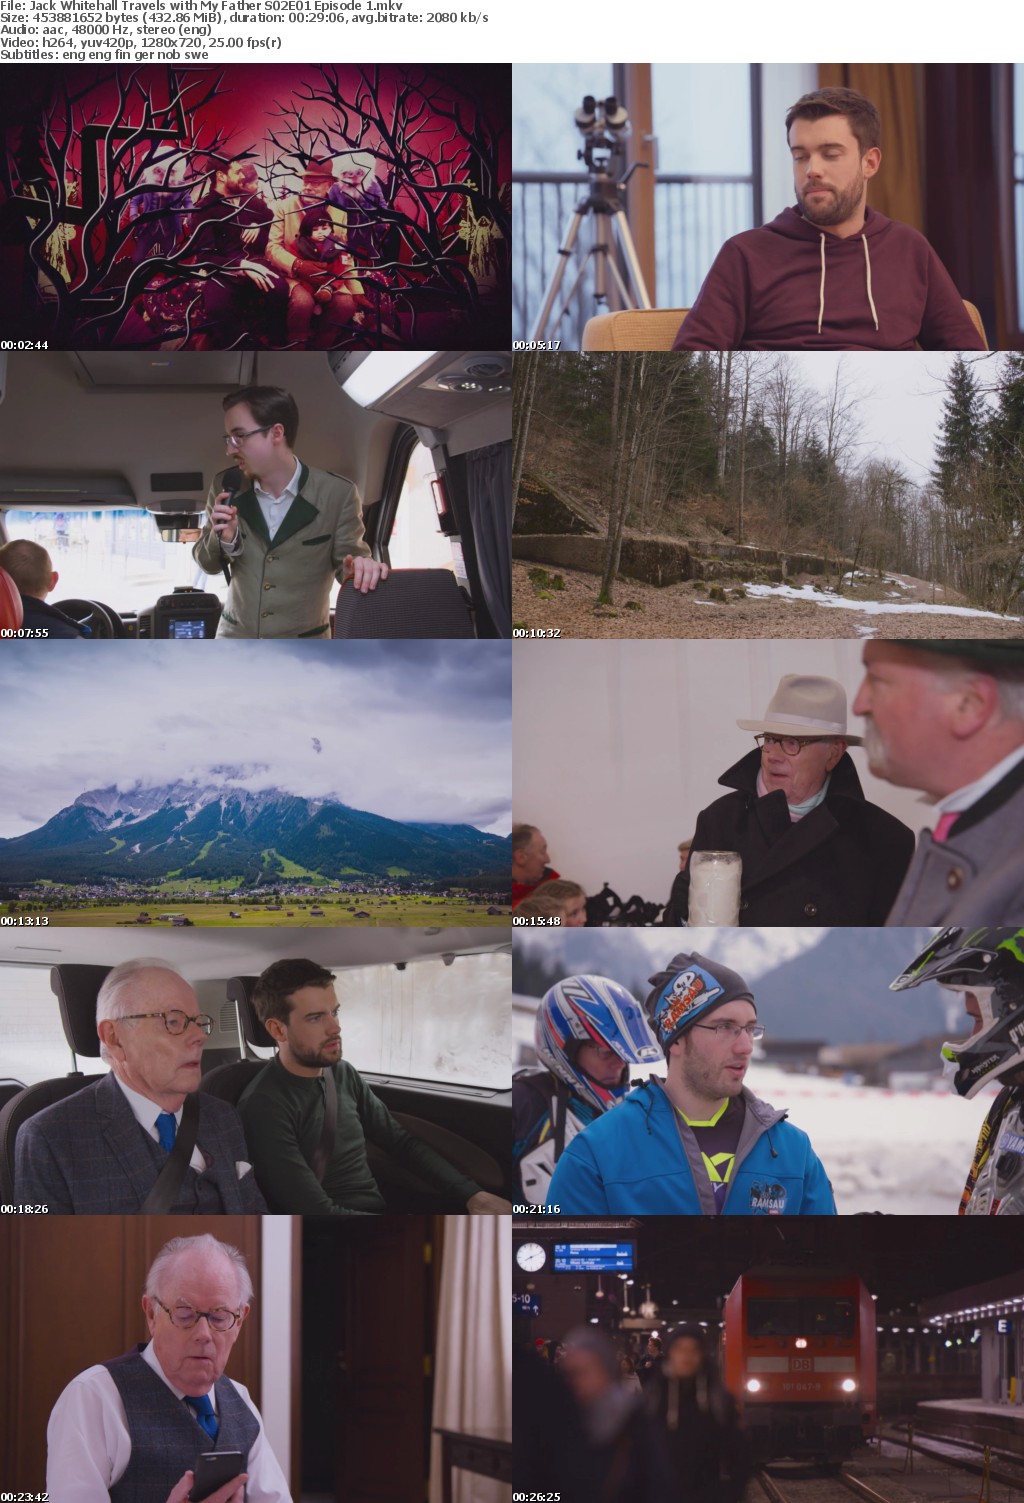 Jack Whitehall Travels With My Father 2017 Season 2 Complete Mixed WEBRip x264 i c